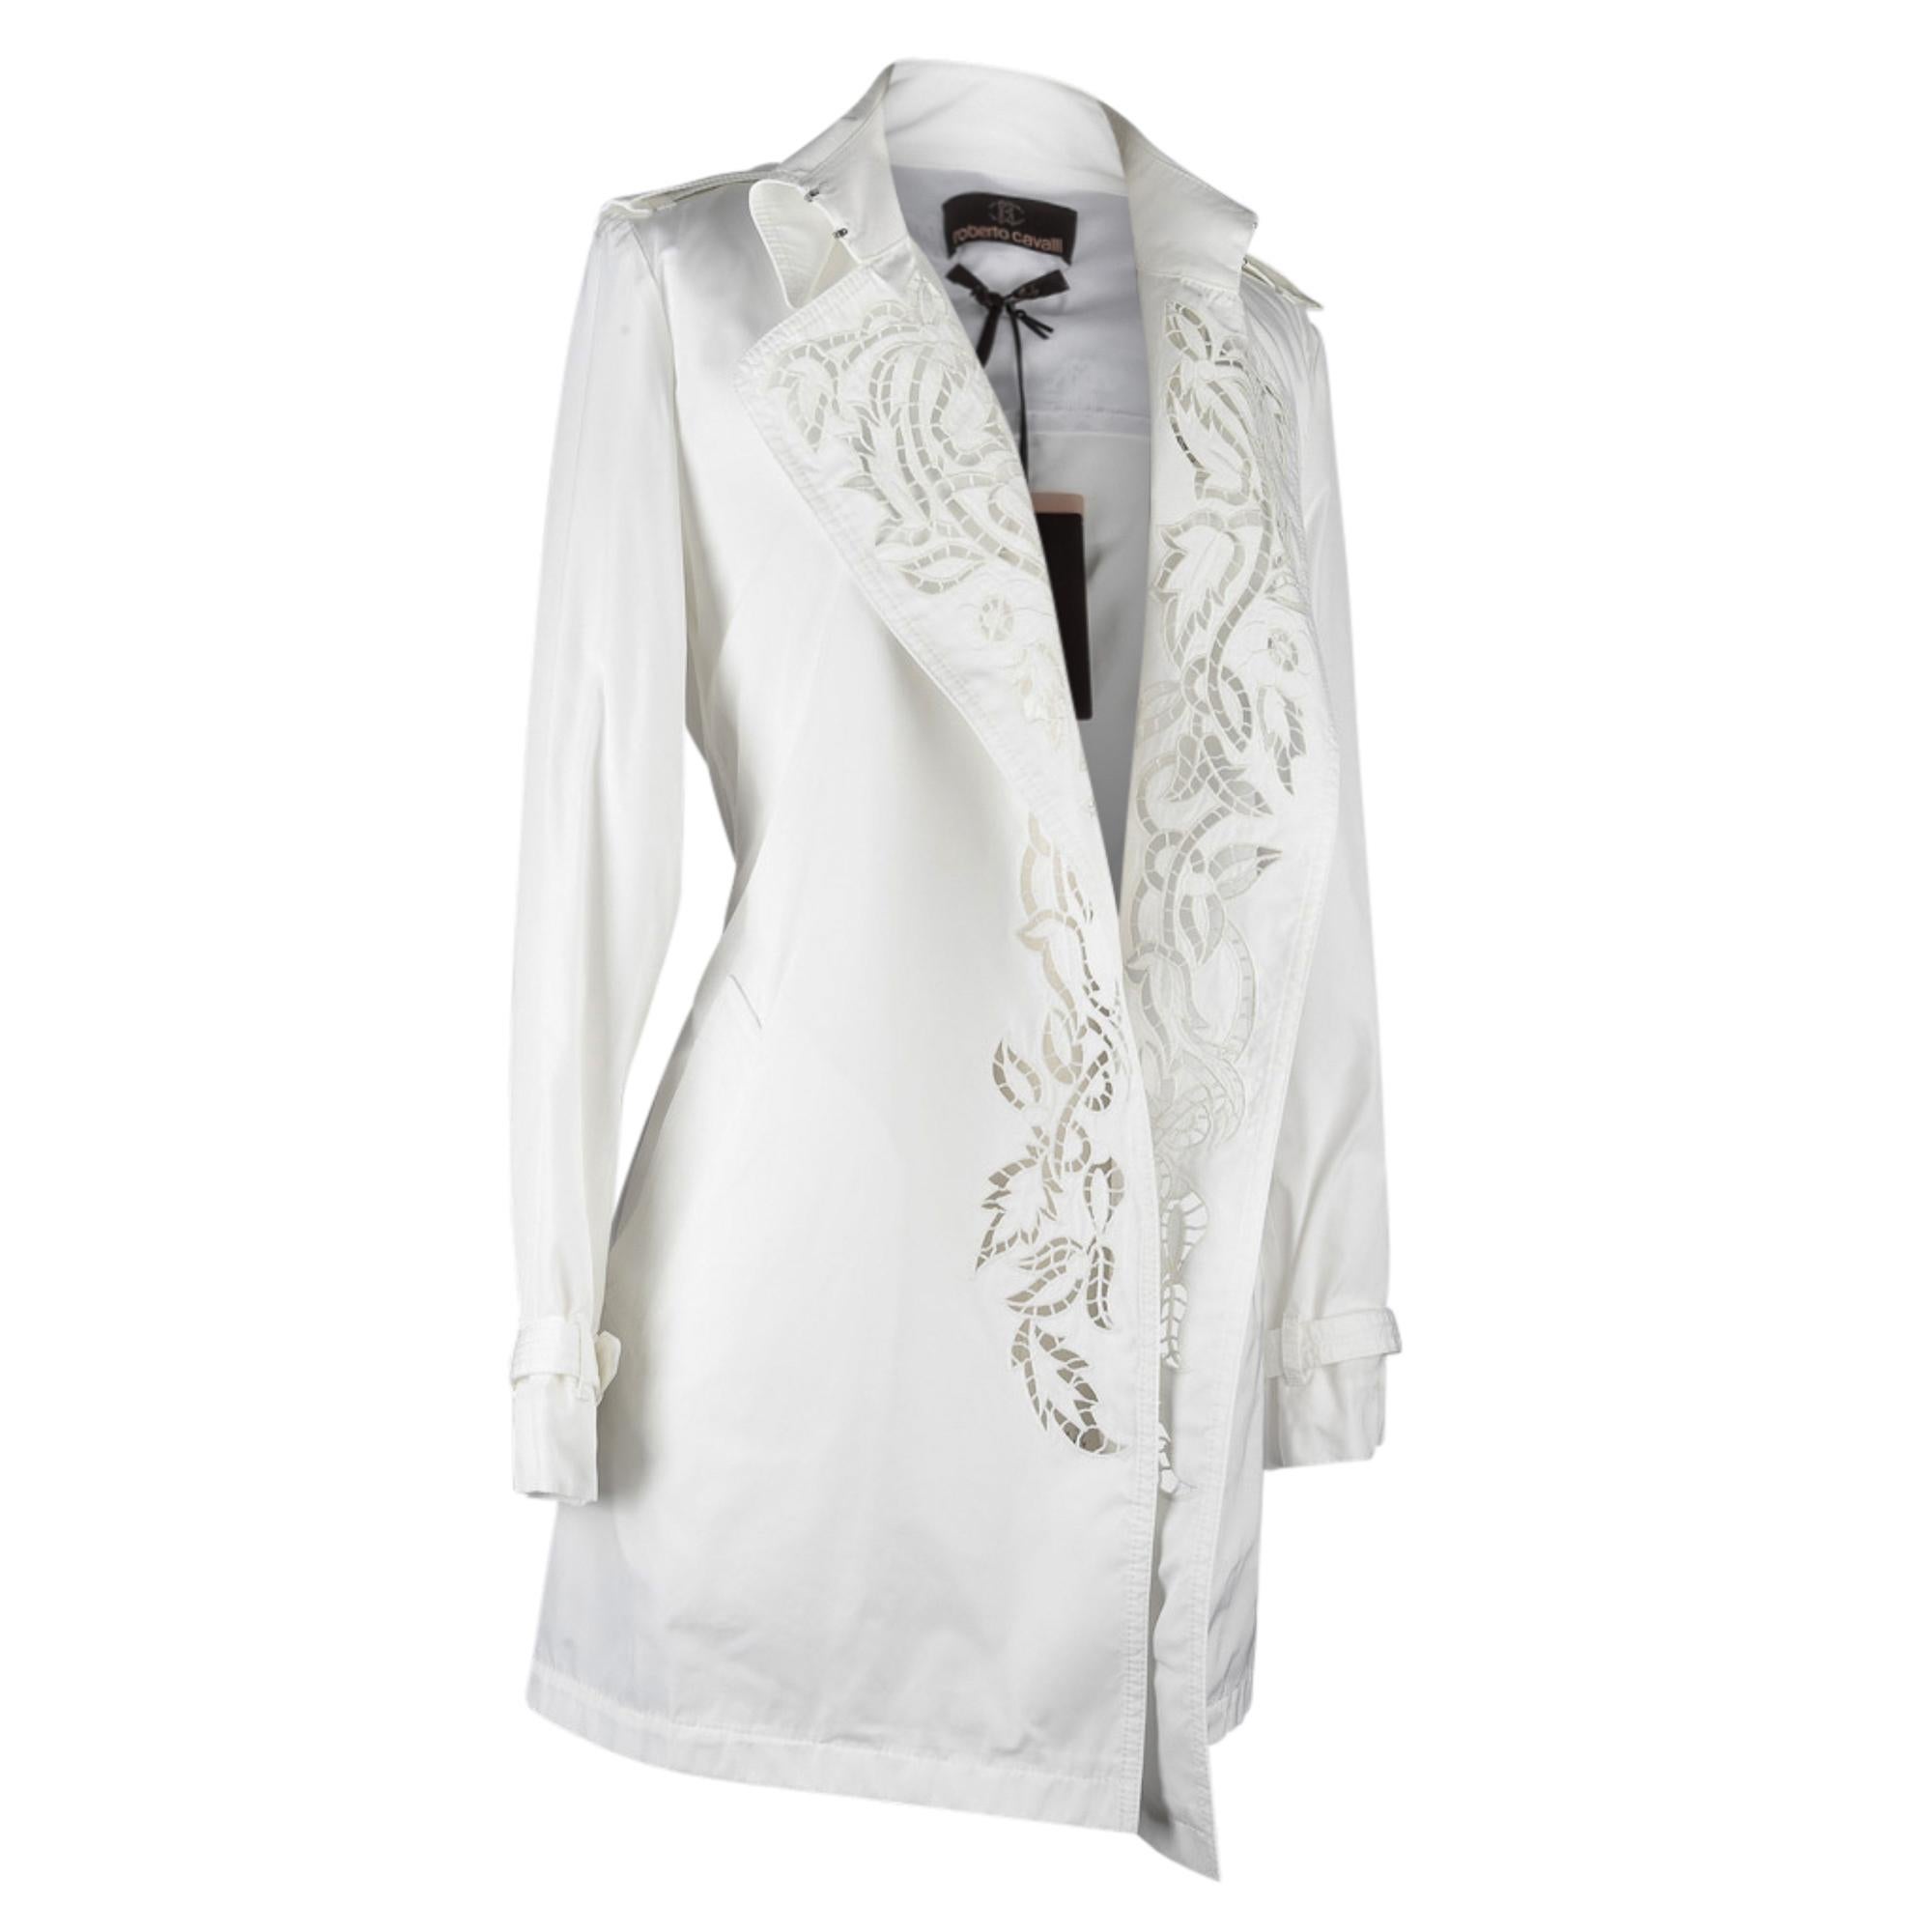 Roberto Cavalli Coat Trench Laser Cut Detail Winter White 42 / 8 New w/ Tag 4